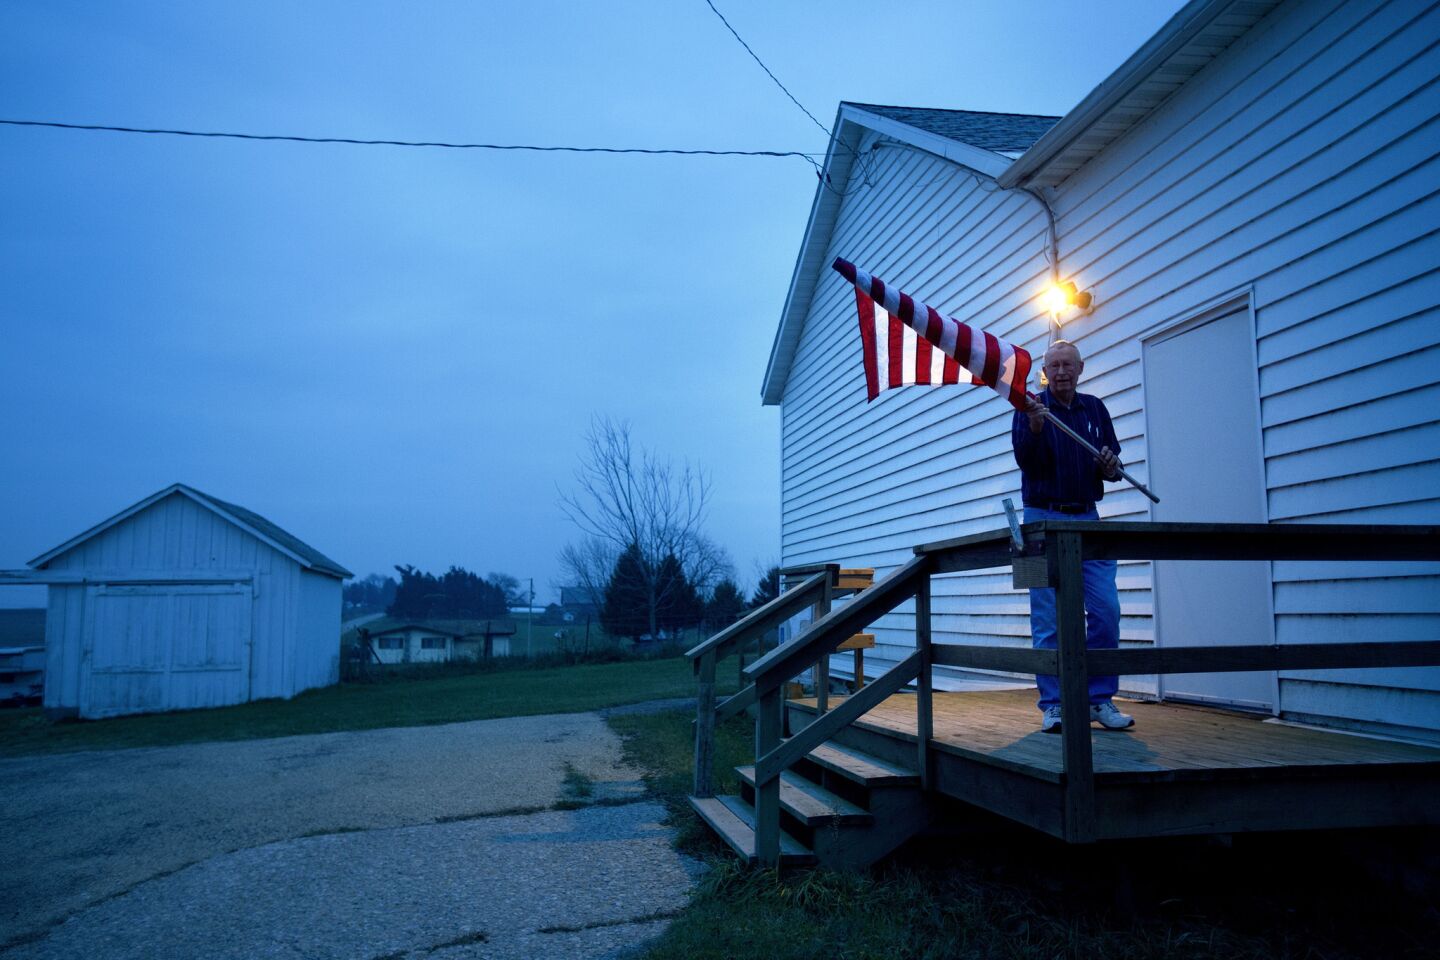 Election Inspector Jim Nodorft unfurls the American flag to hang it outside the Smelser Town hall before polls open at 7 a.m. in Georgetown, Wis.